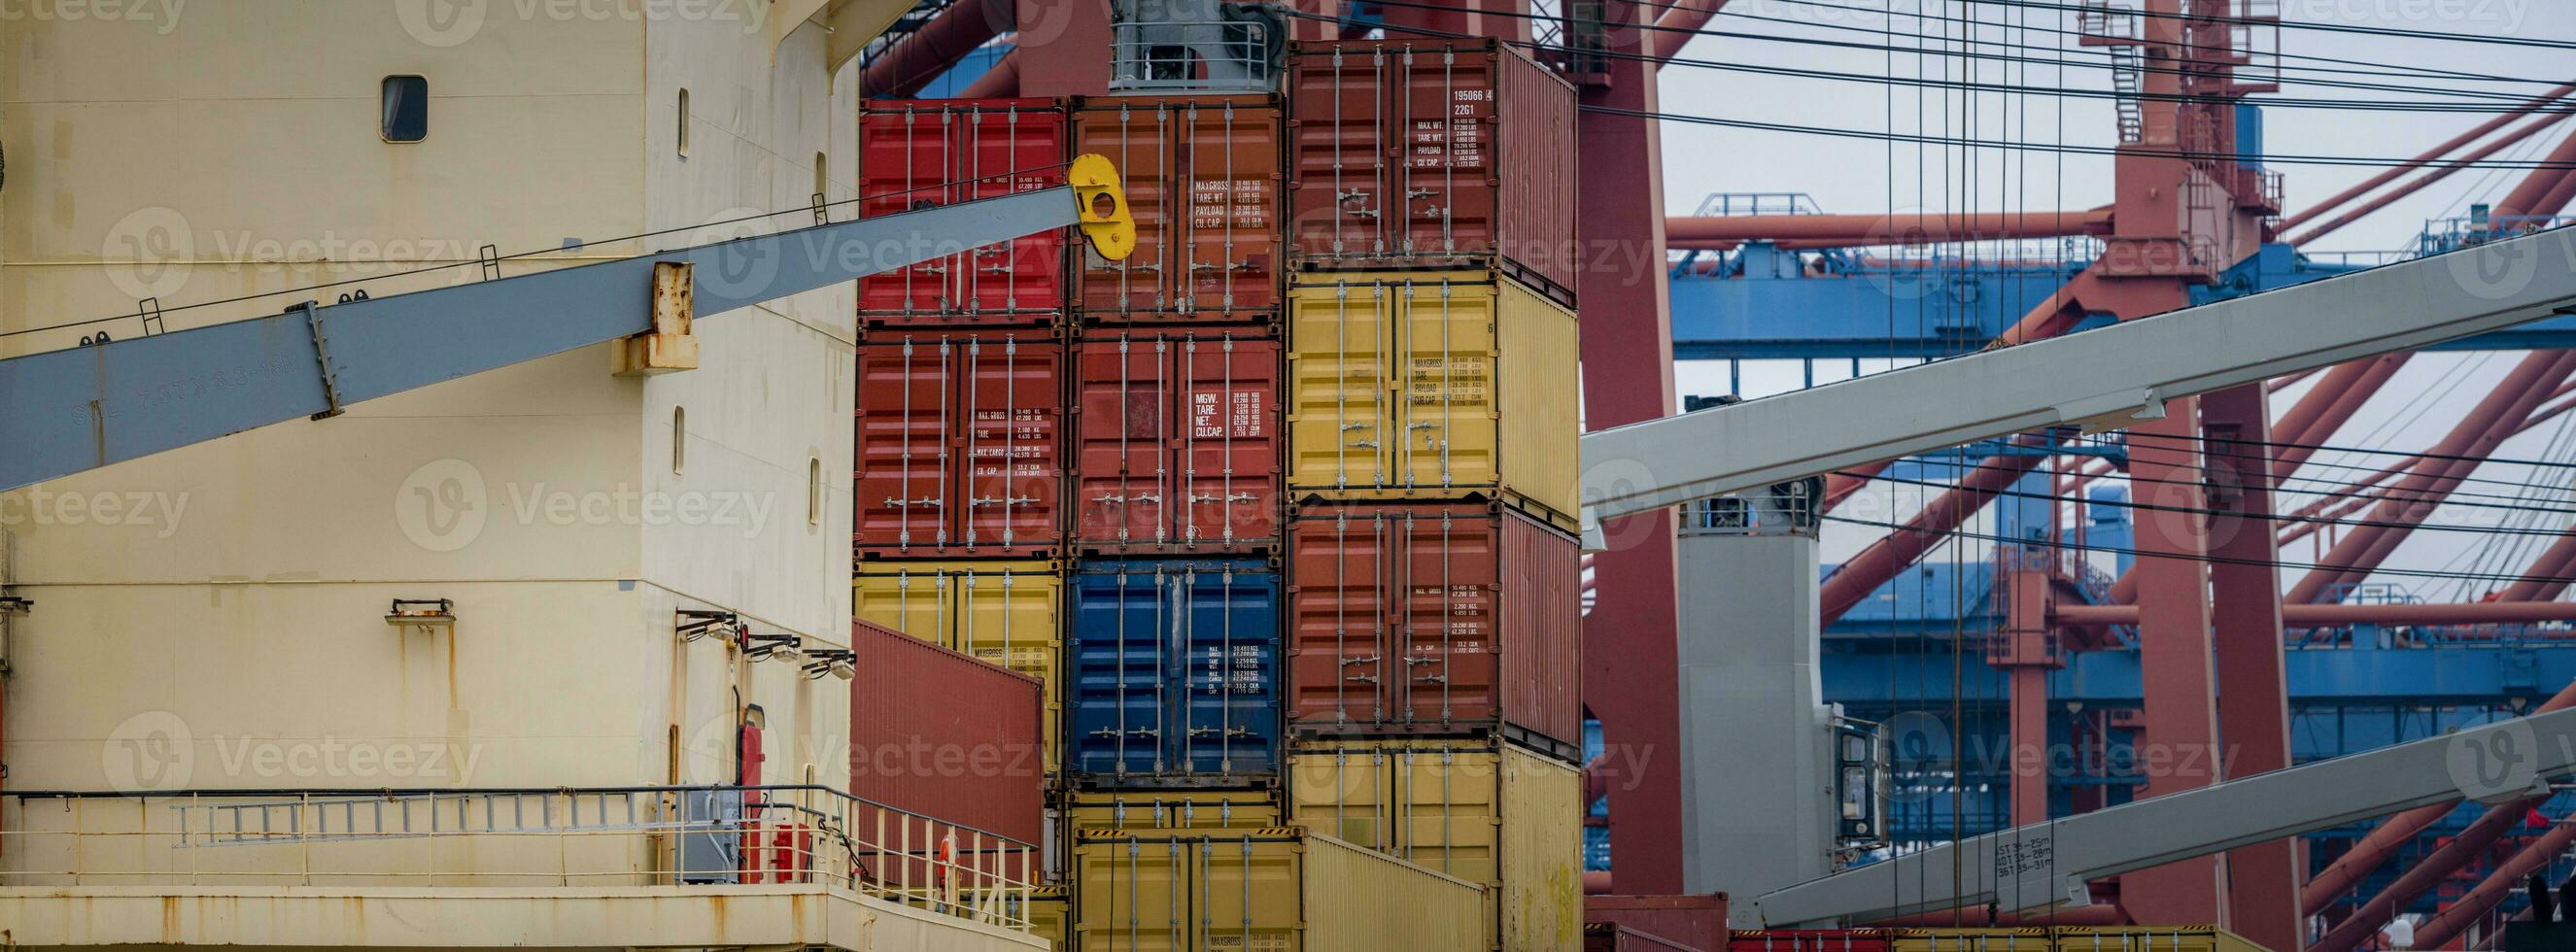 Container on a container ship photo